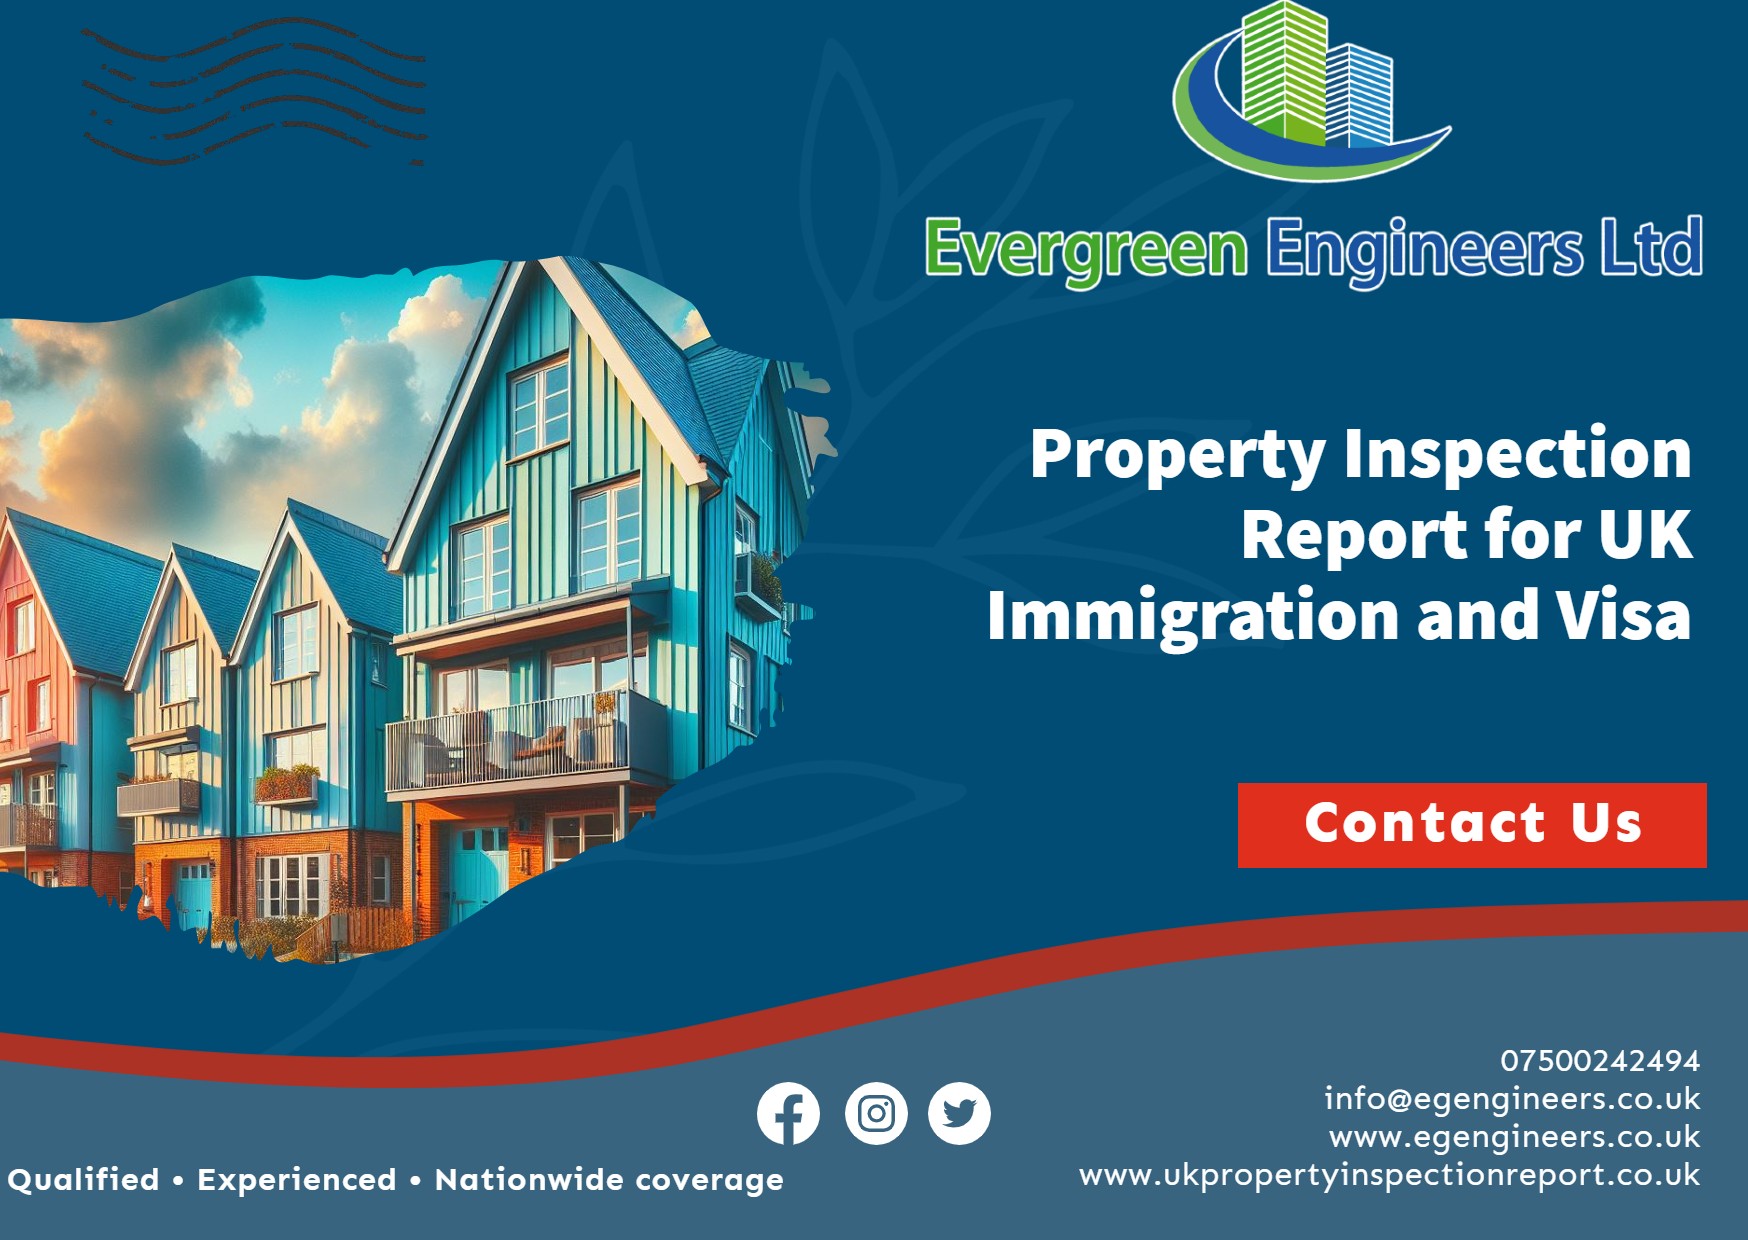 Property inspection report St Albans for UK Visa and Immigration